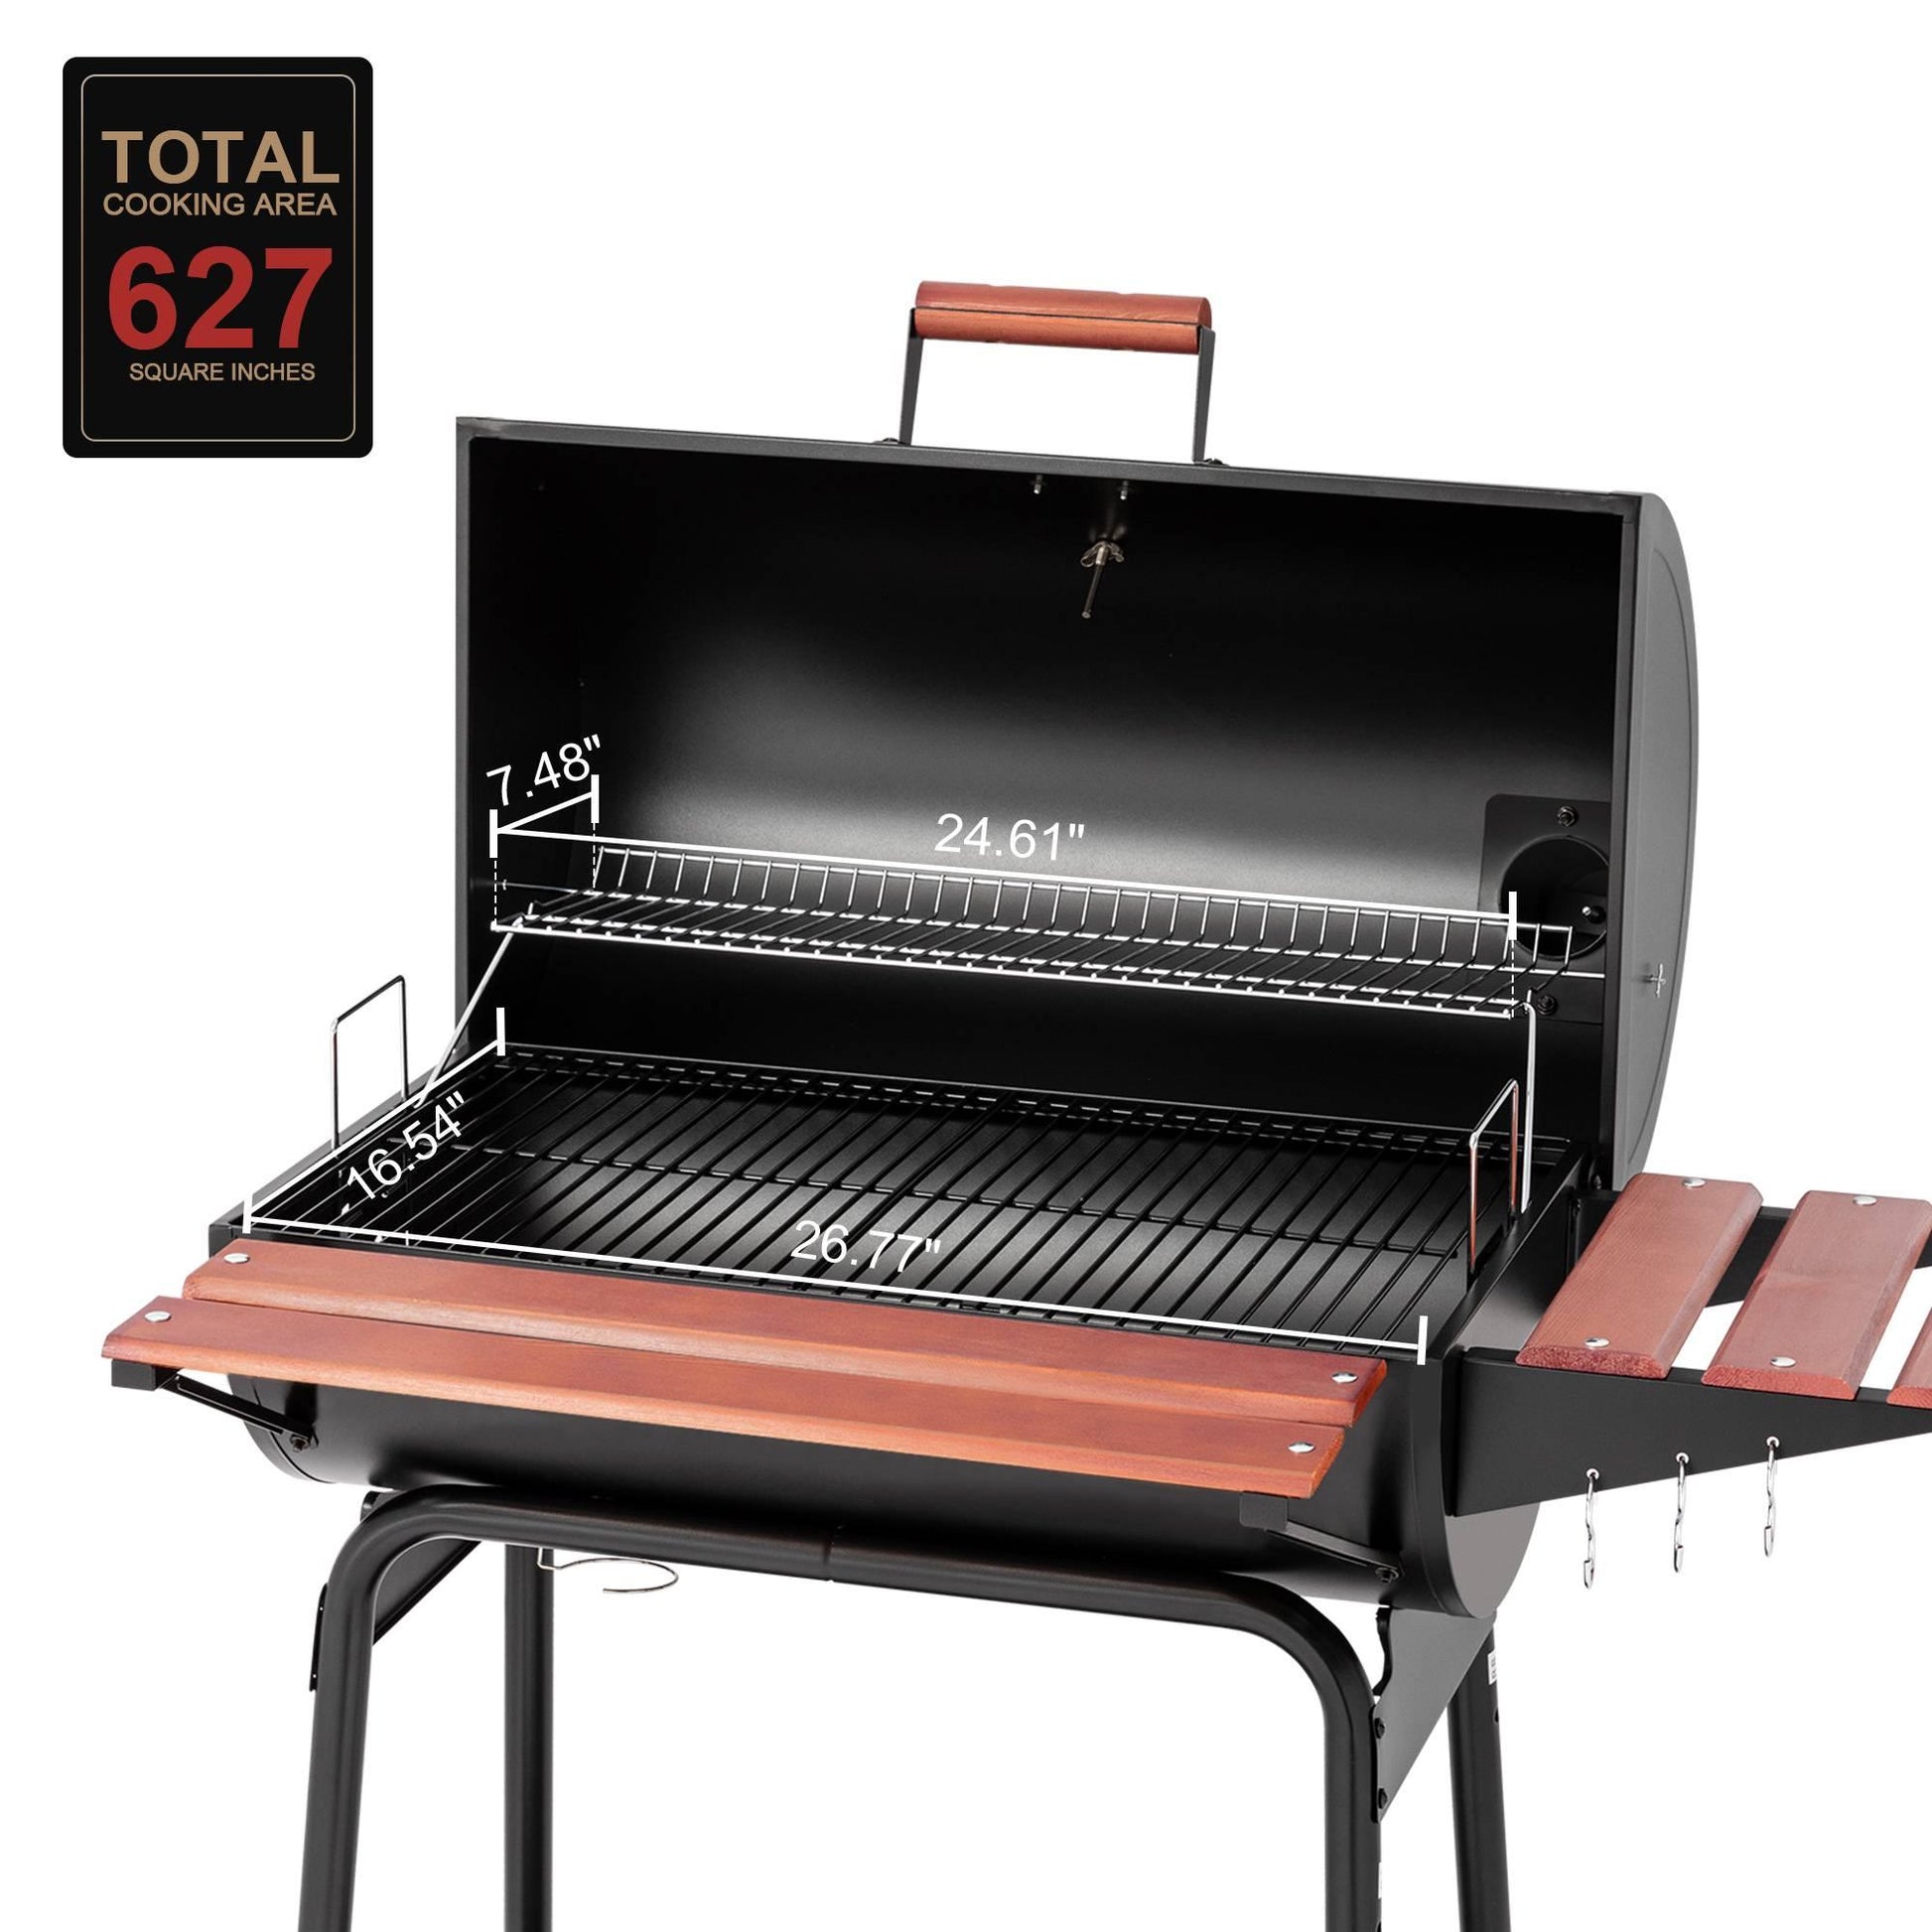 30-Inch Barrel Charcoal Grill with Wood-Painted Table - Royal Gourmet